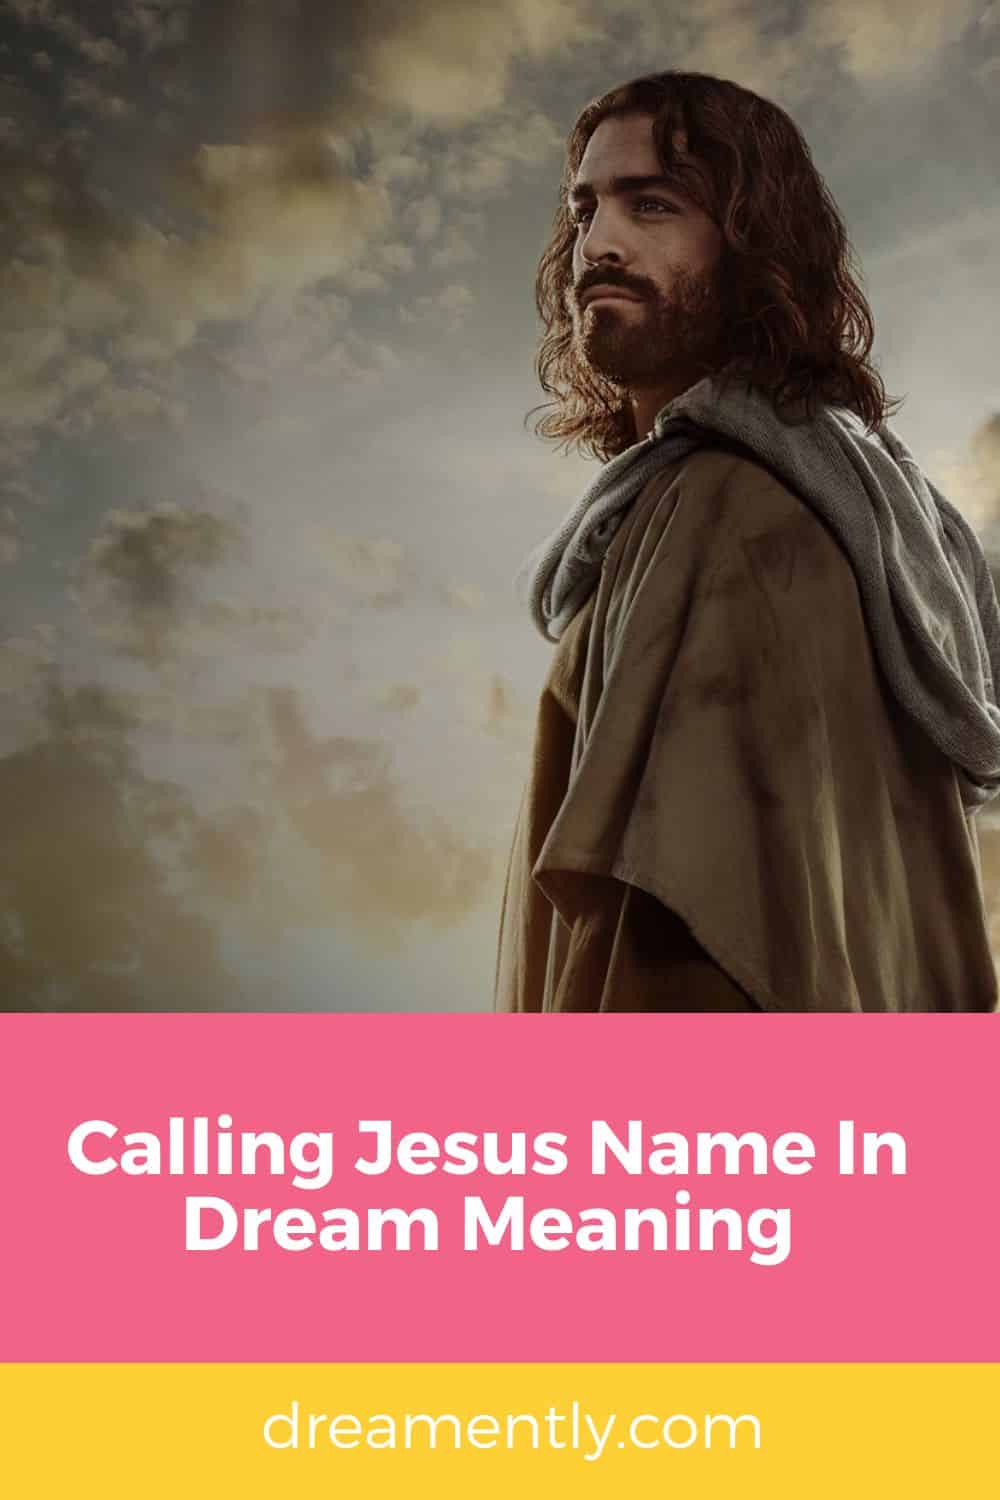 Calling Jesus Name In Dream Meaning